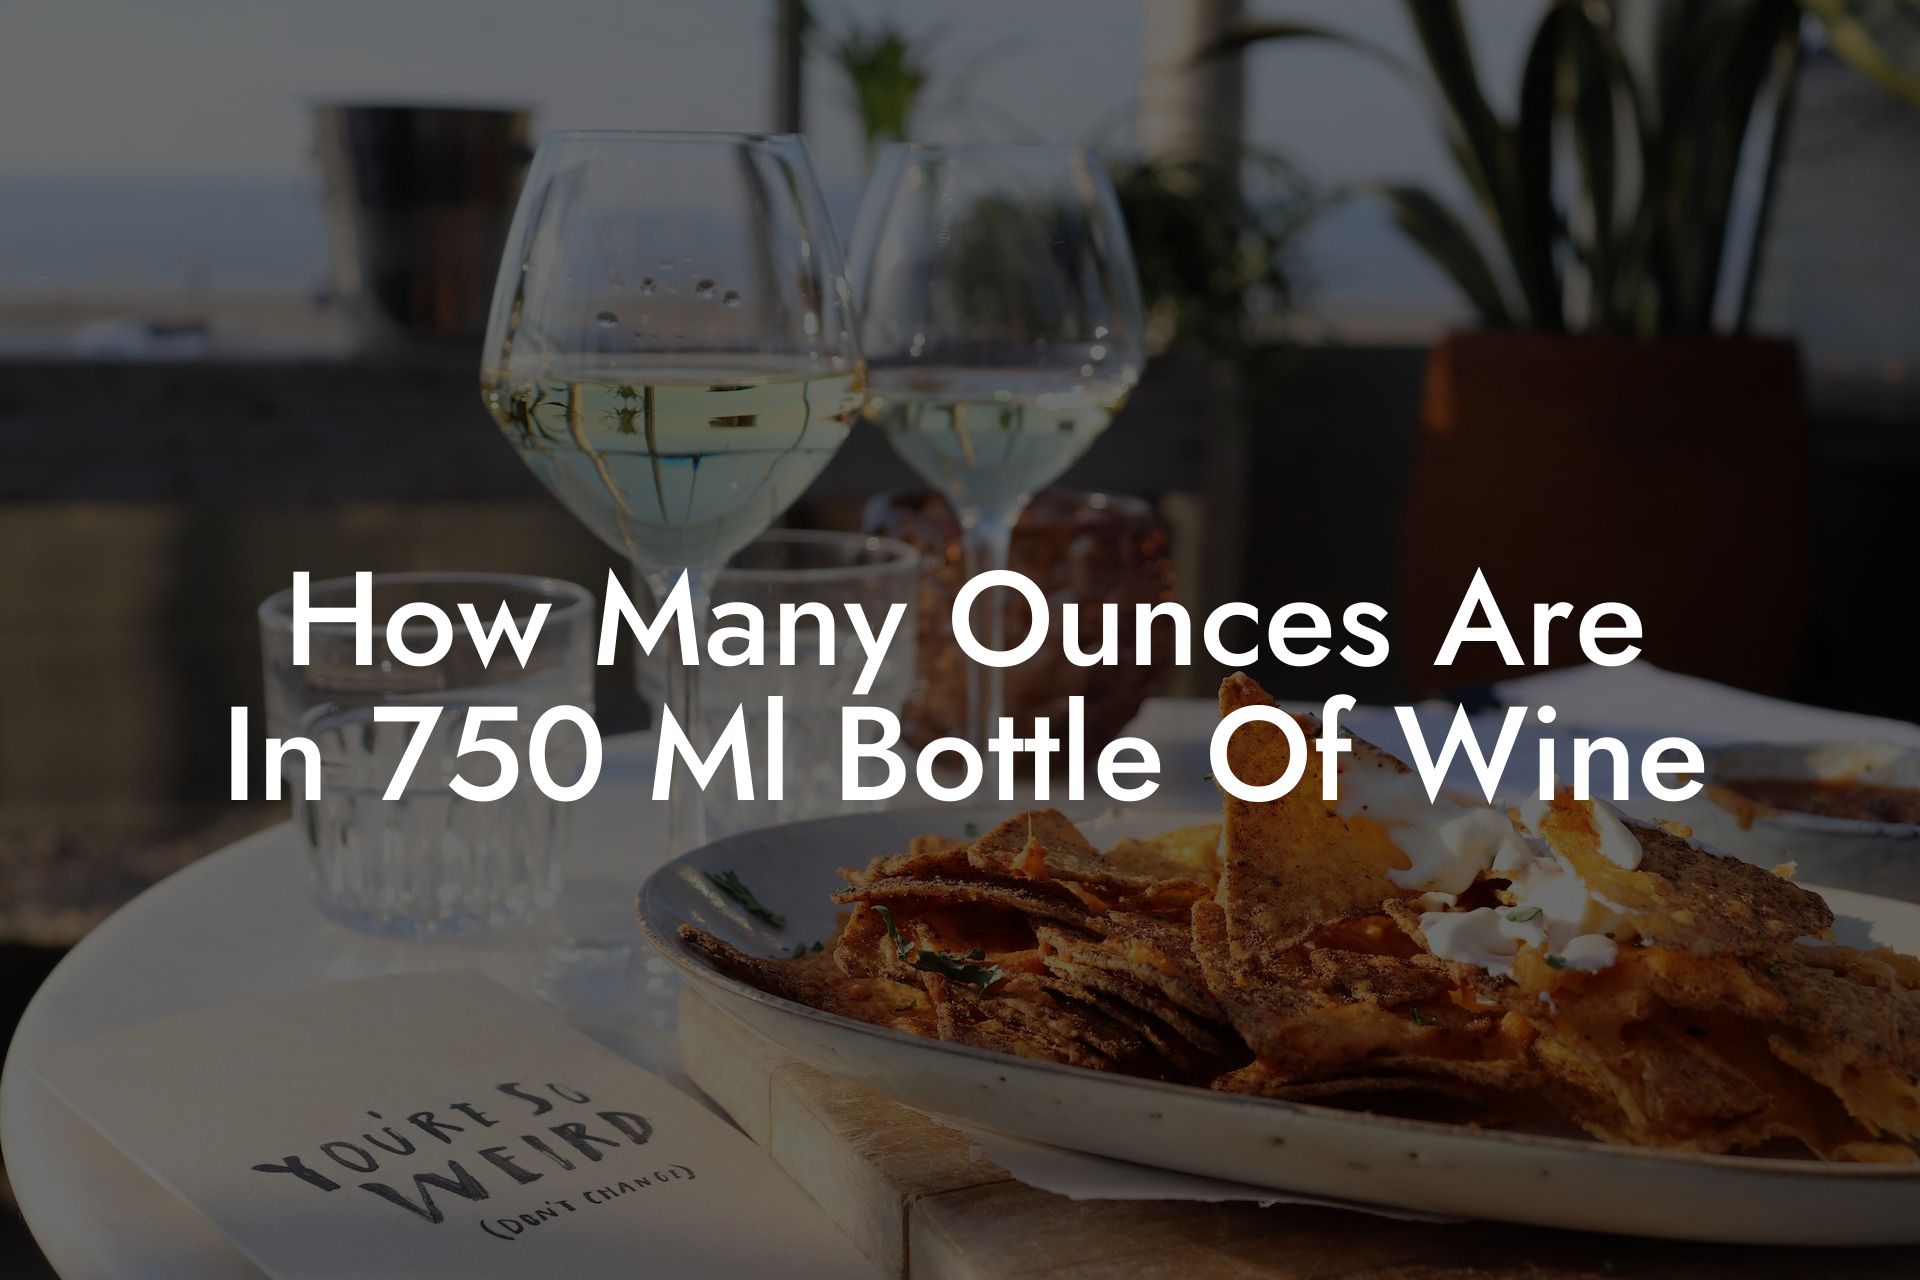 How Many Ounces Are In 750 Ml Bottle Of Wine